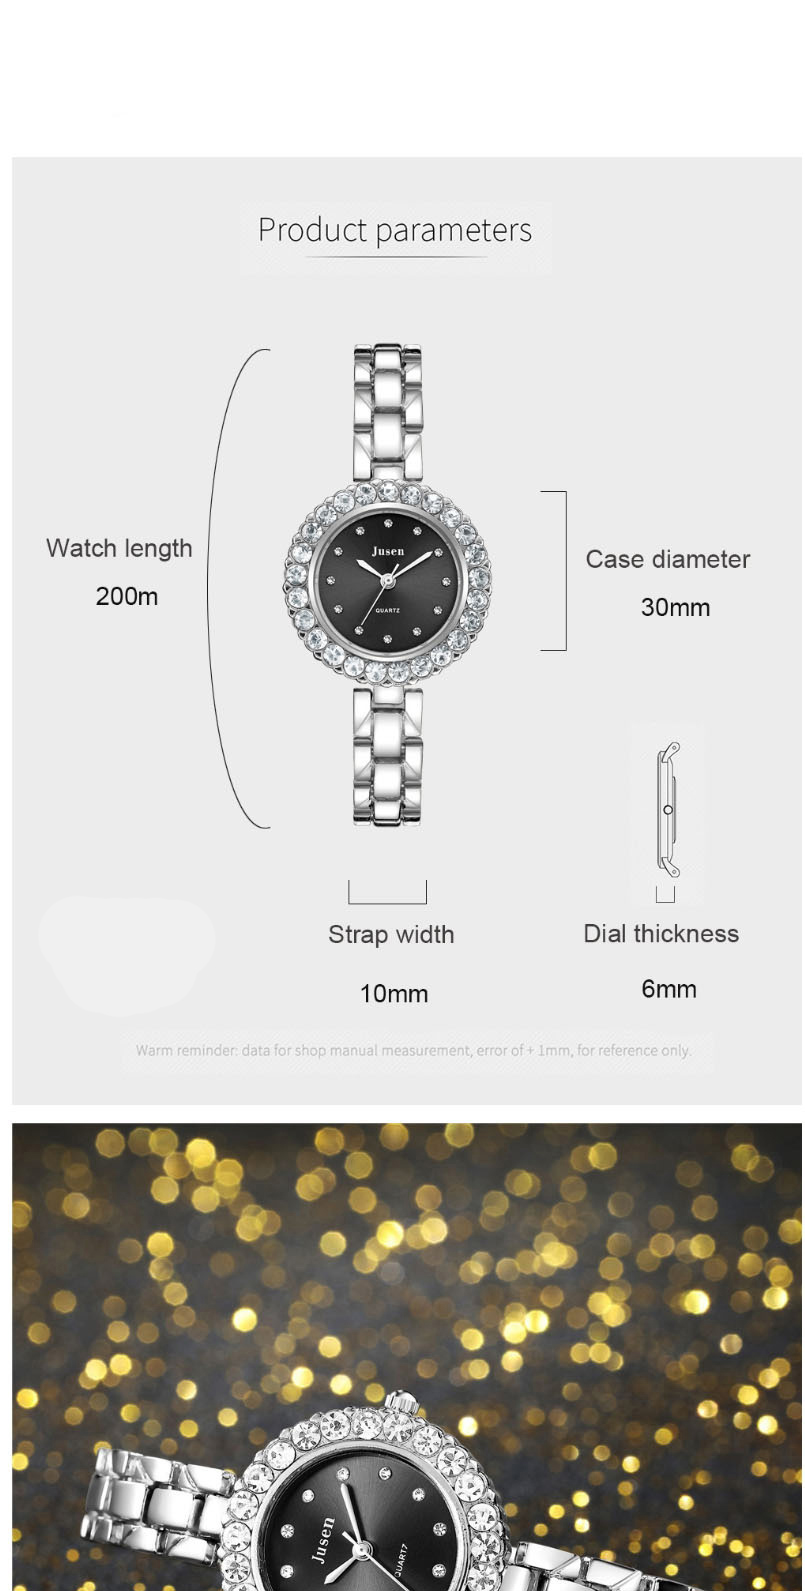 Fashion Black Face With Silver Band Diamond Bracelet Watch With Diamonds,Ladies Watches